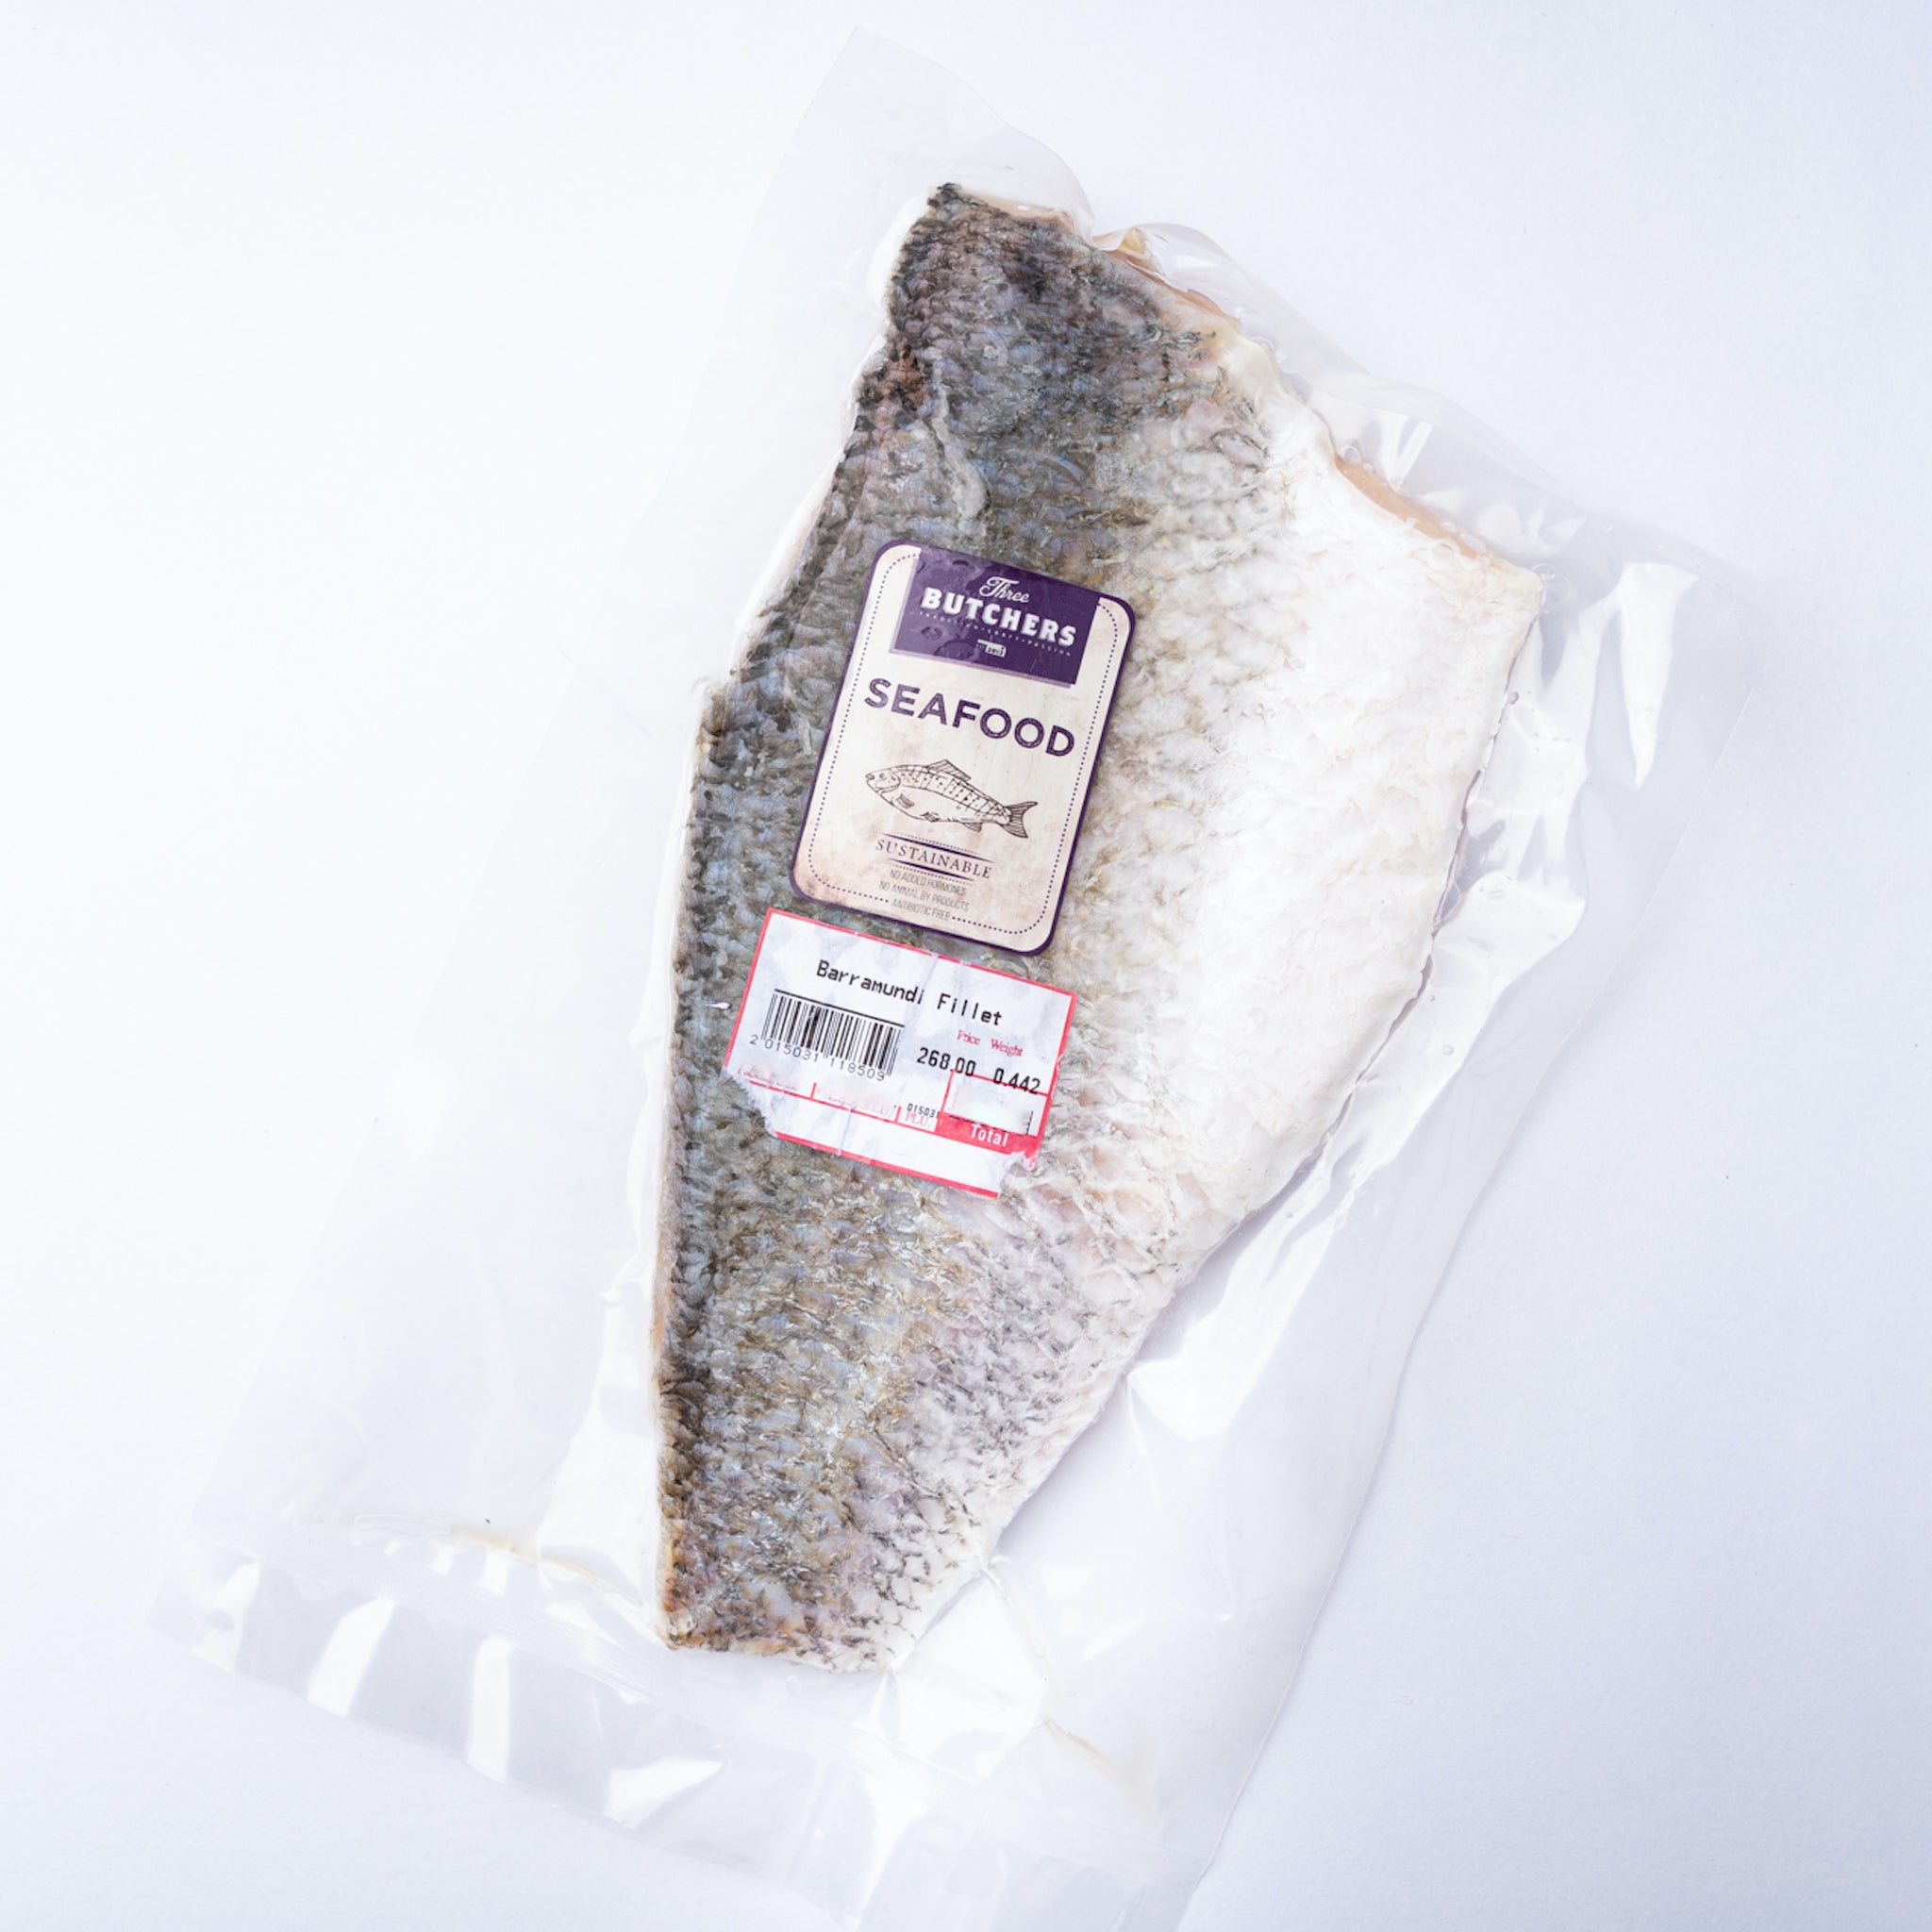 A frozen Barramundi Fillet with the silvery skin on in a vacuum bag with a purple label saying Three Butchers Fish.